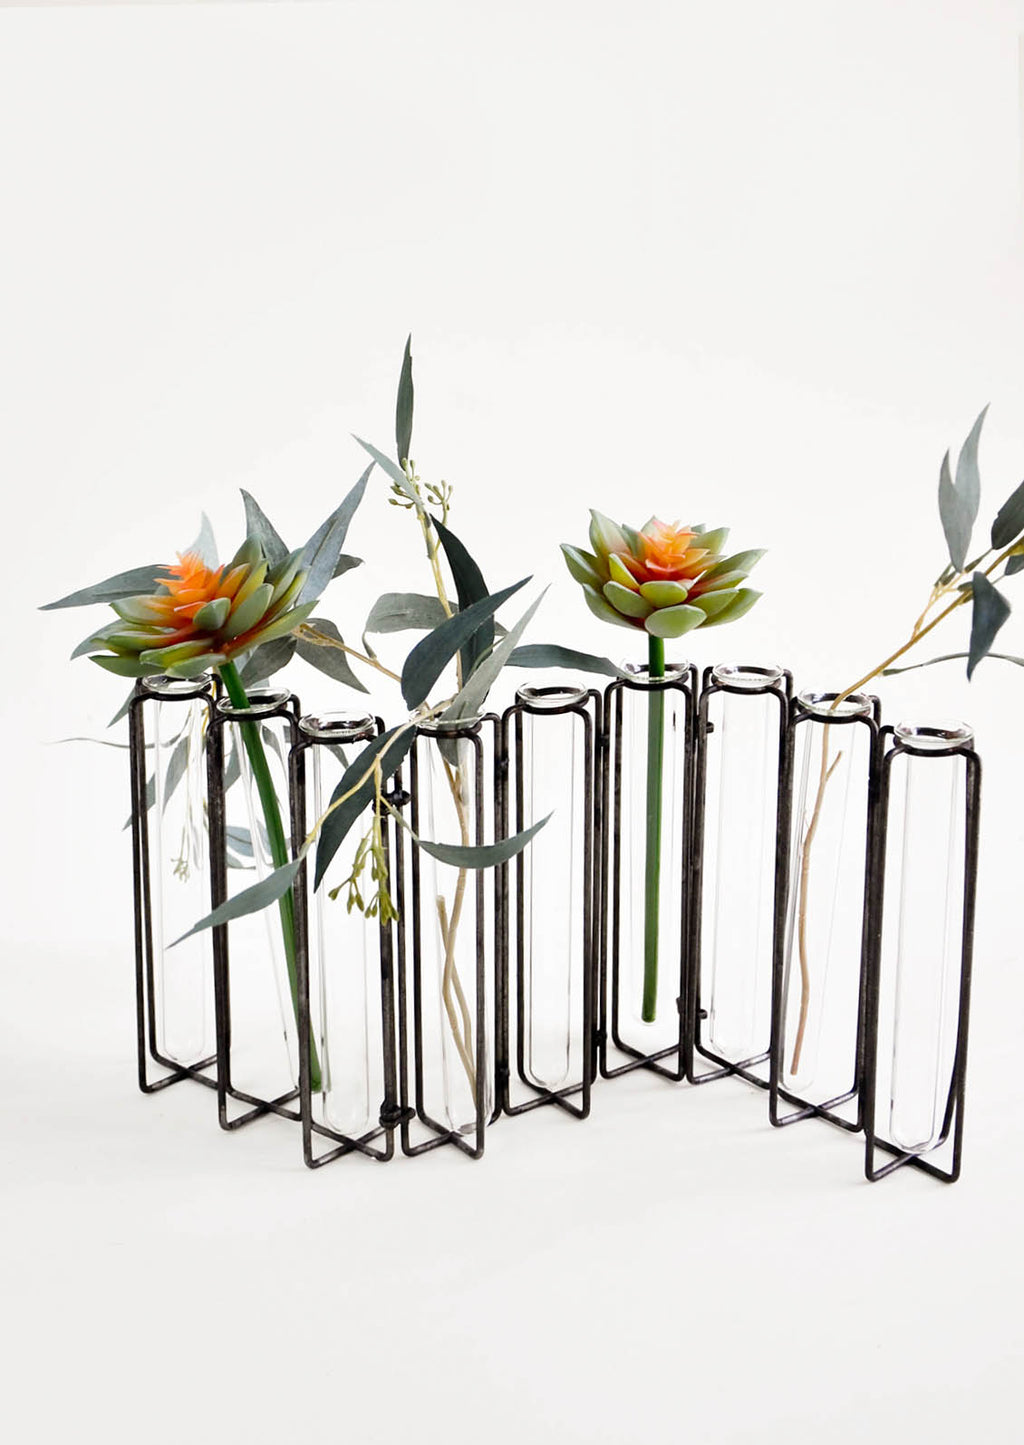 Iron: Multi-stem vase composed of nine glass vials side by side, resting inside individual compartments on a metal frame.